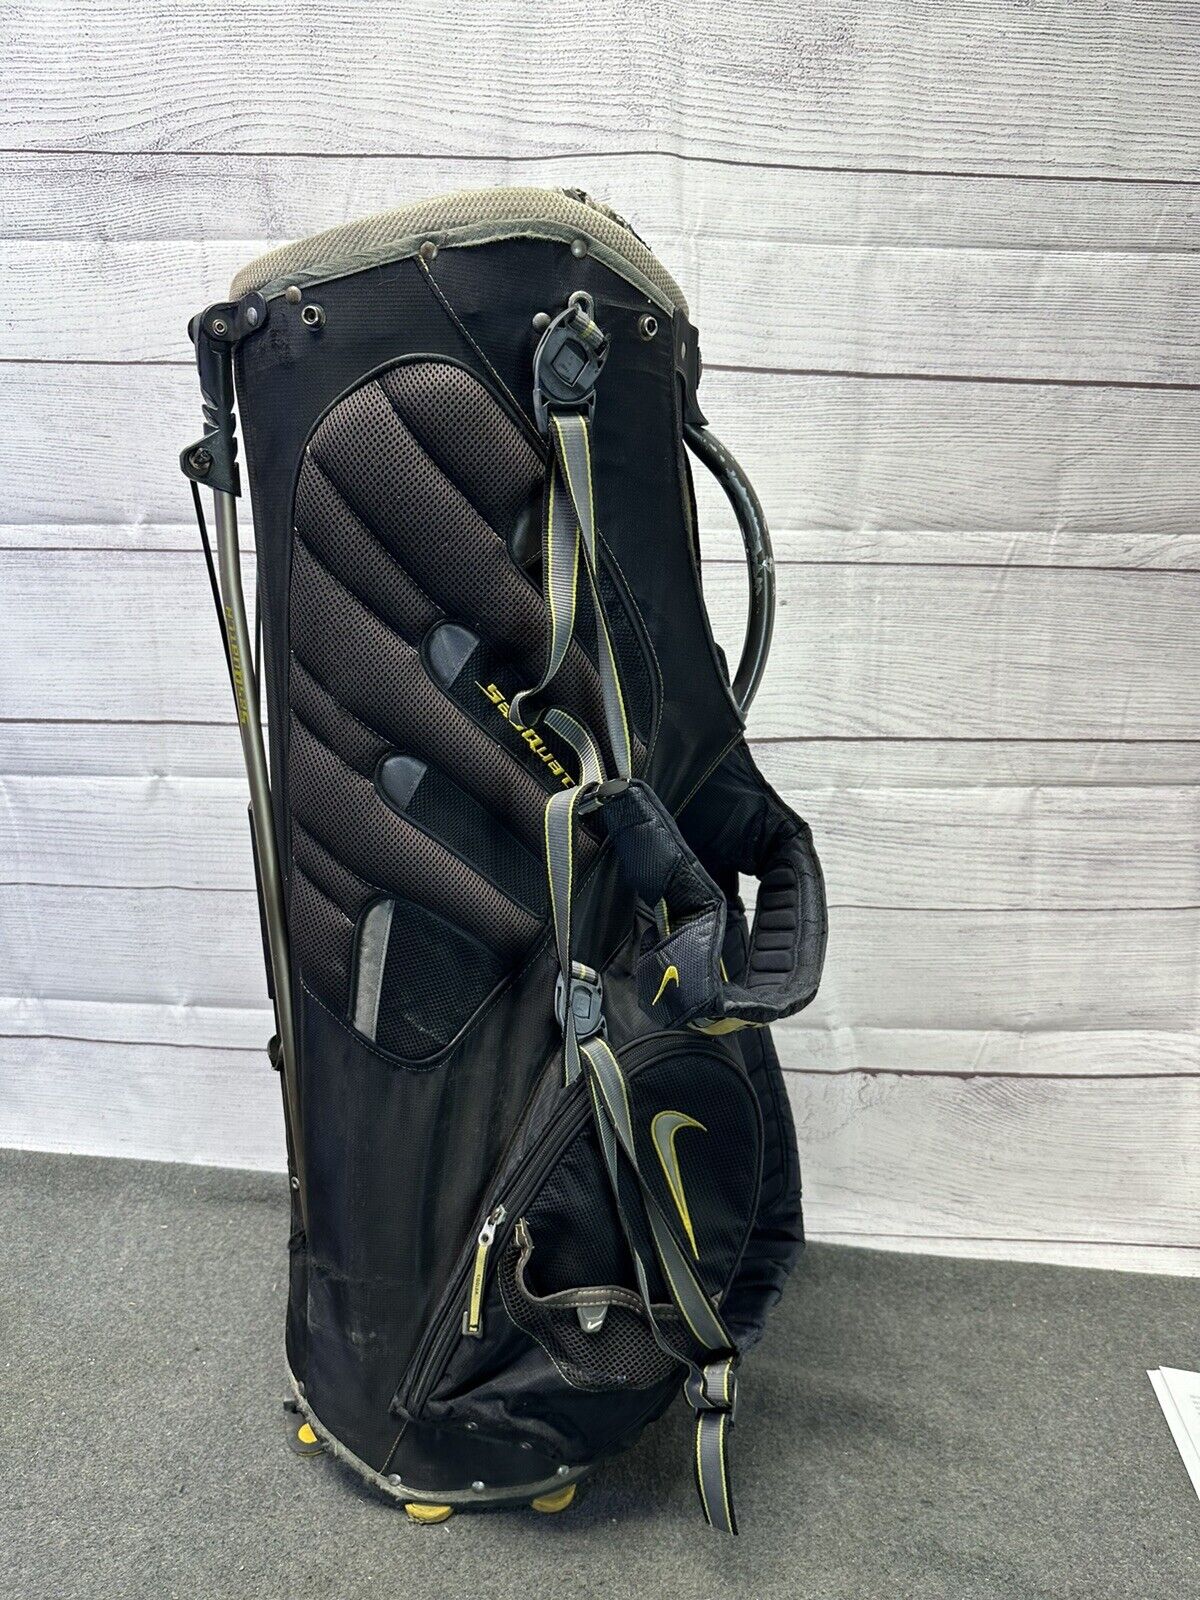 Used Nike SQ Sasquatch Carry Stand Bag Duel 14 Pockets Black/Gray/Yellow